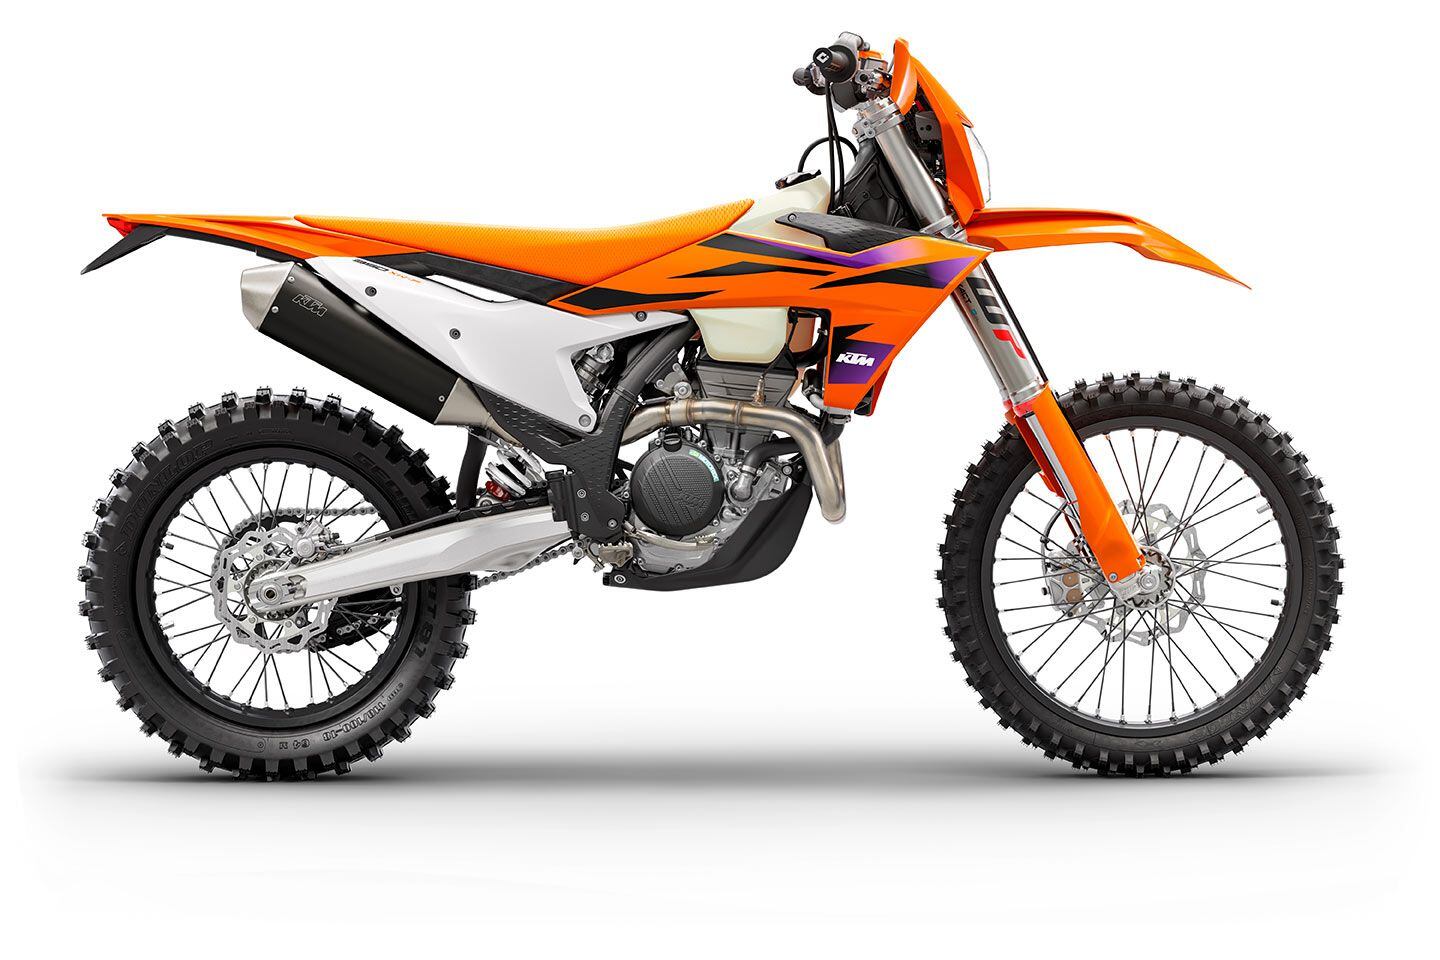 The Austrian manufacturer has added two new 50-state off-highway compliant models to its enduro lineup with the 350 XW-F (pictured) and 500 XW-F.